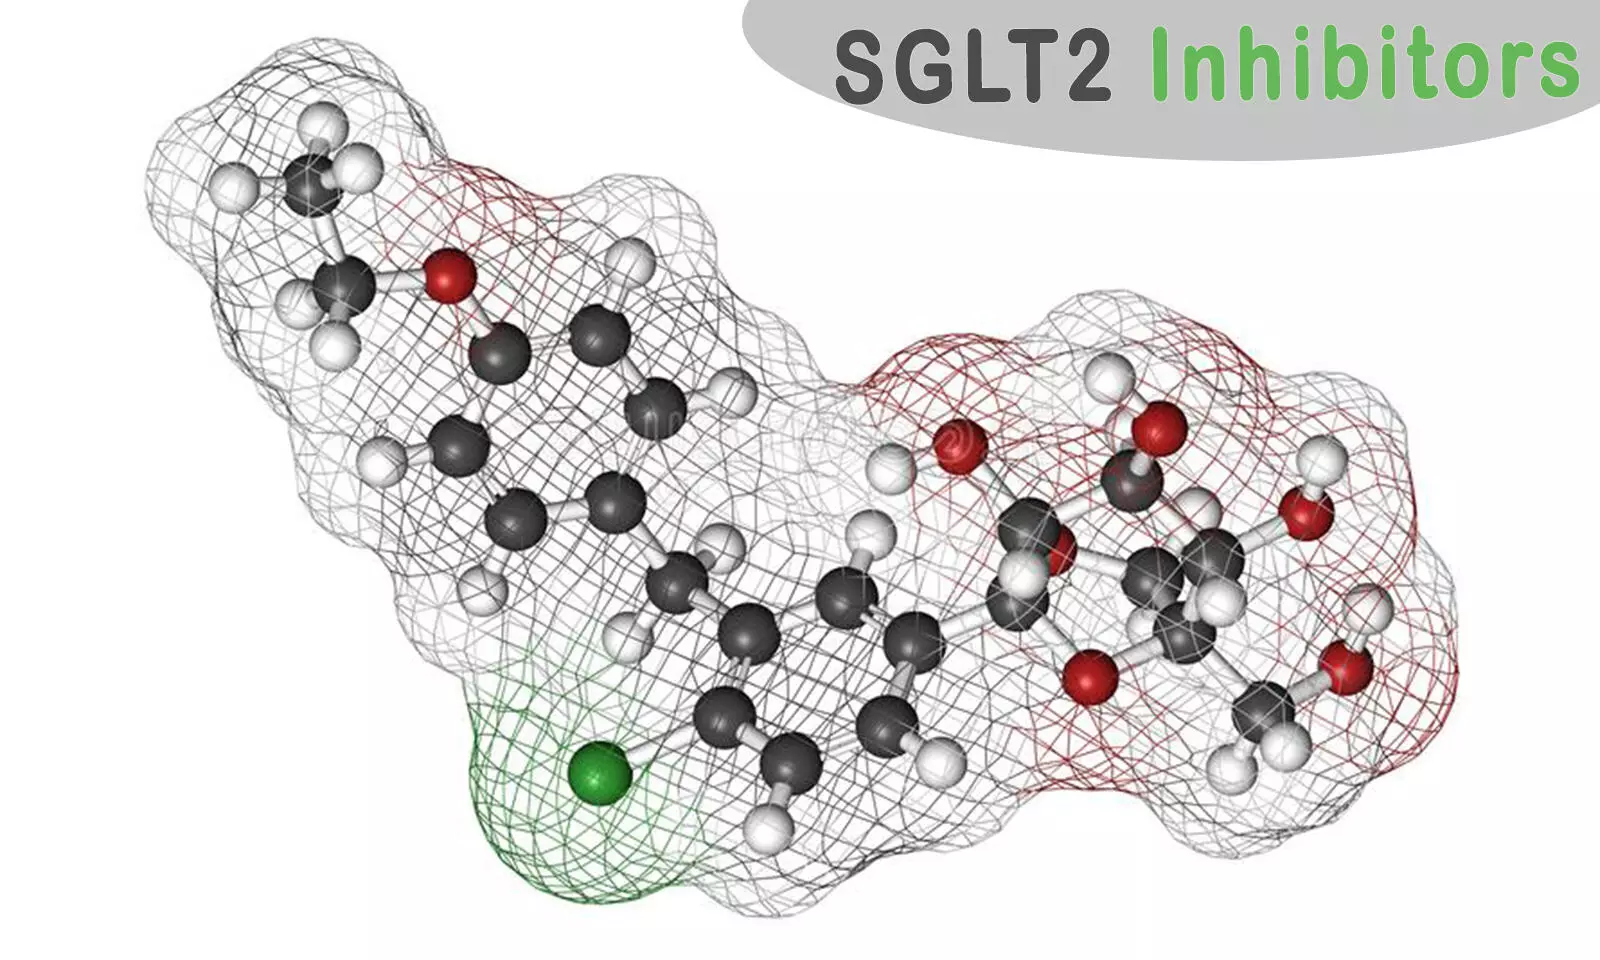 SGLT2 inhibitors improve survival and renal outcomes in heart failure: Lancet